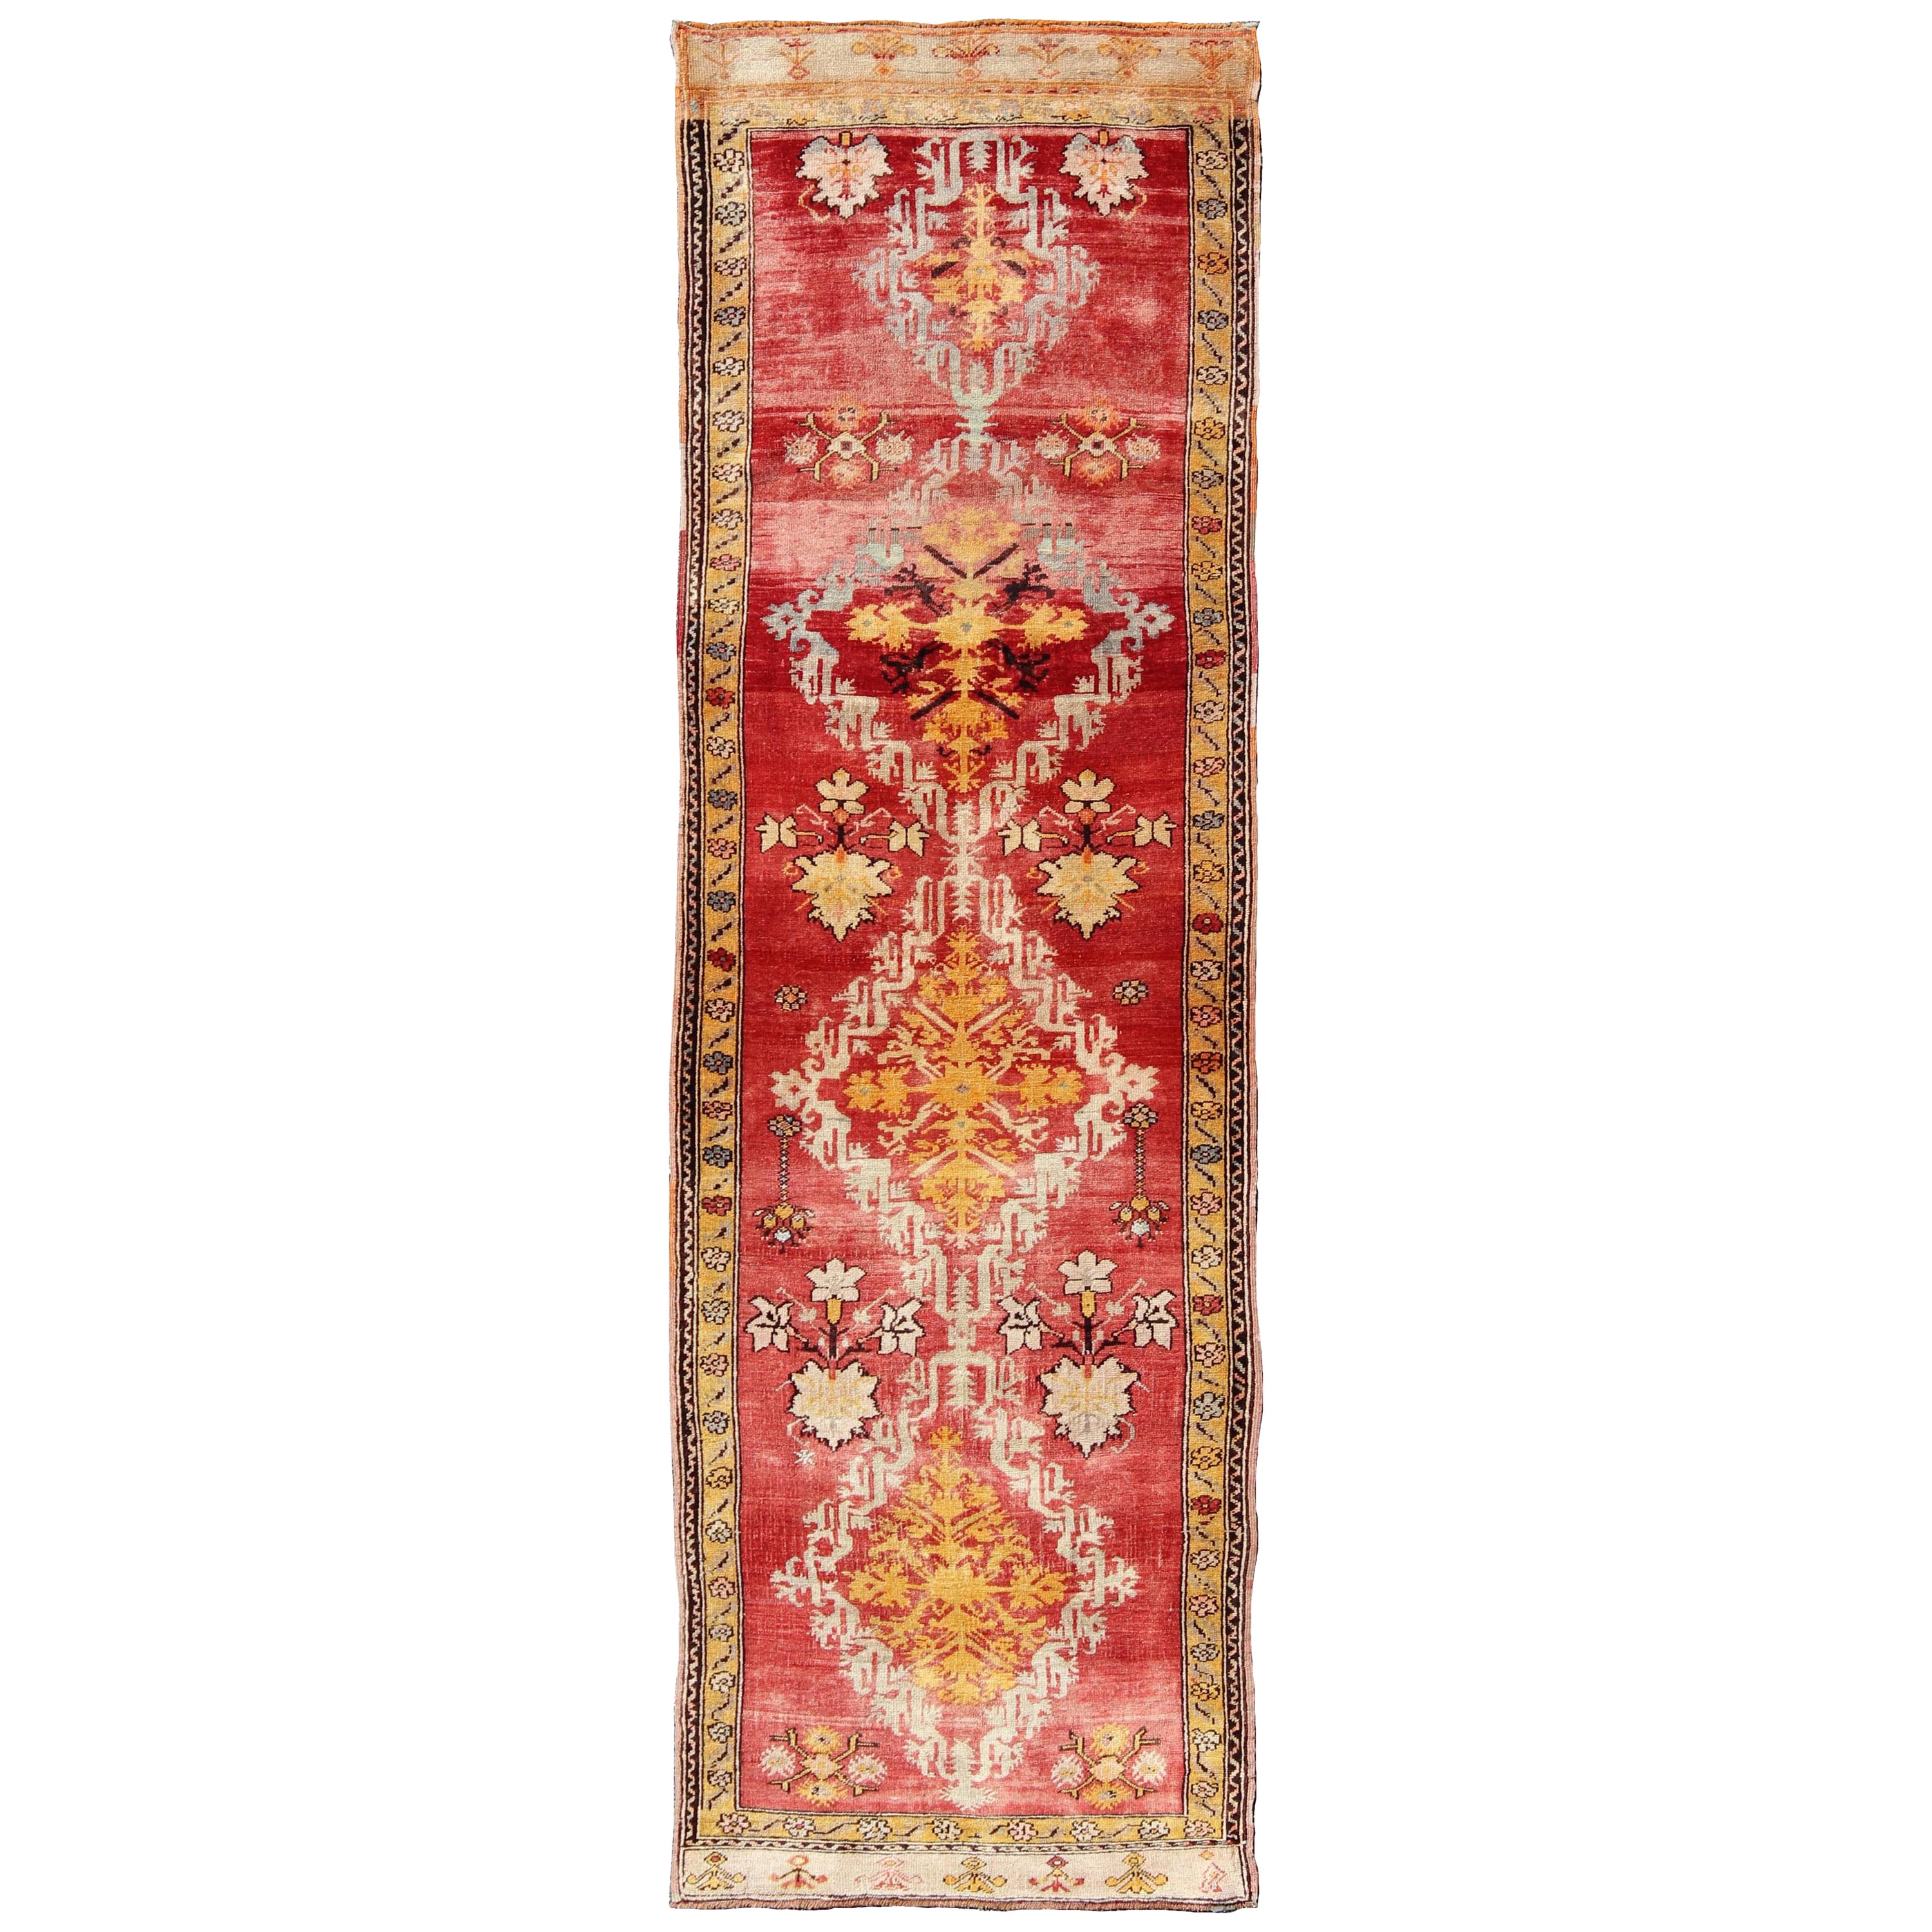 Antique Turkish Oushak Runner with Tribal Medallions in Red, Orange, and Yellow